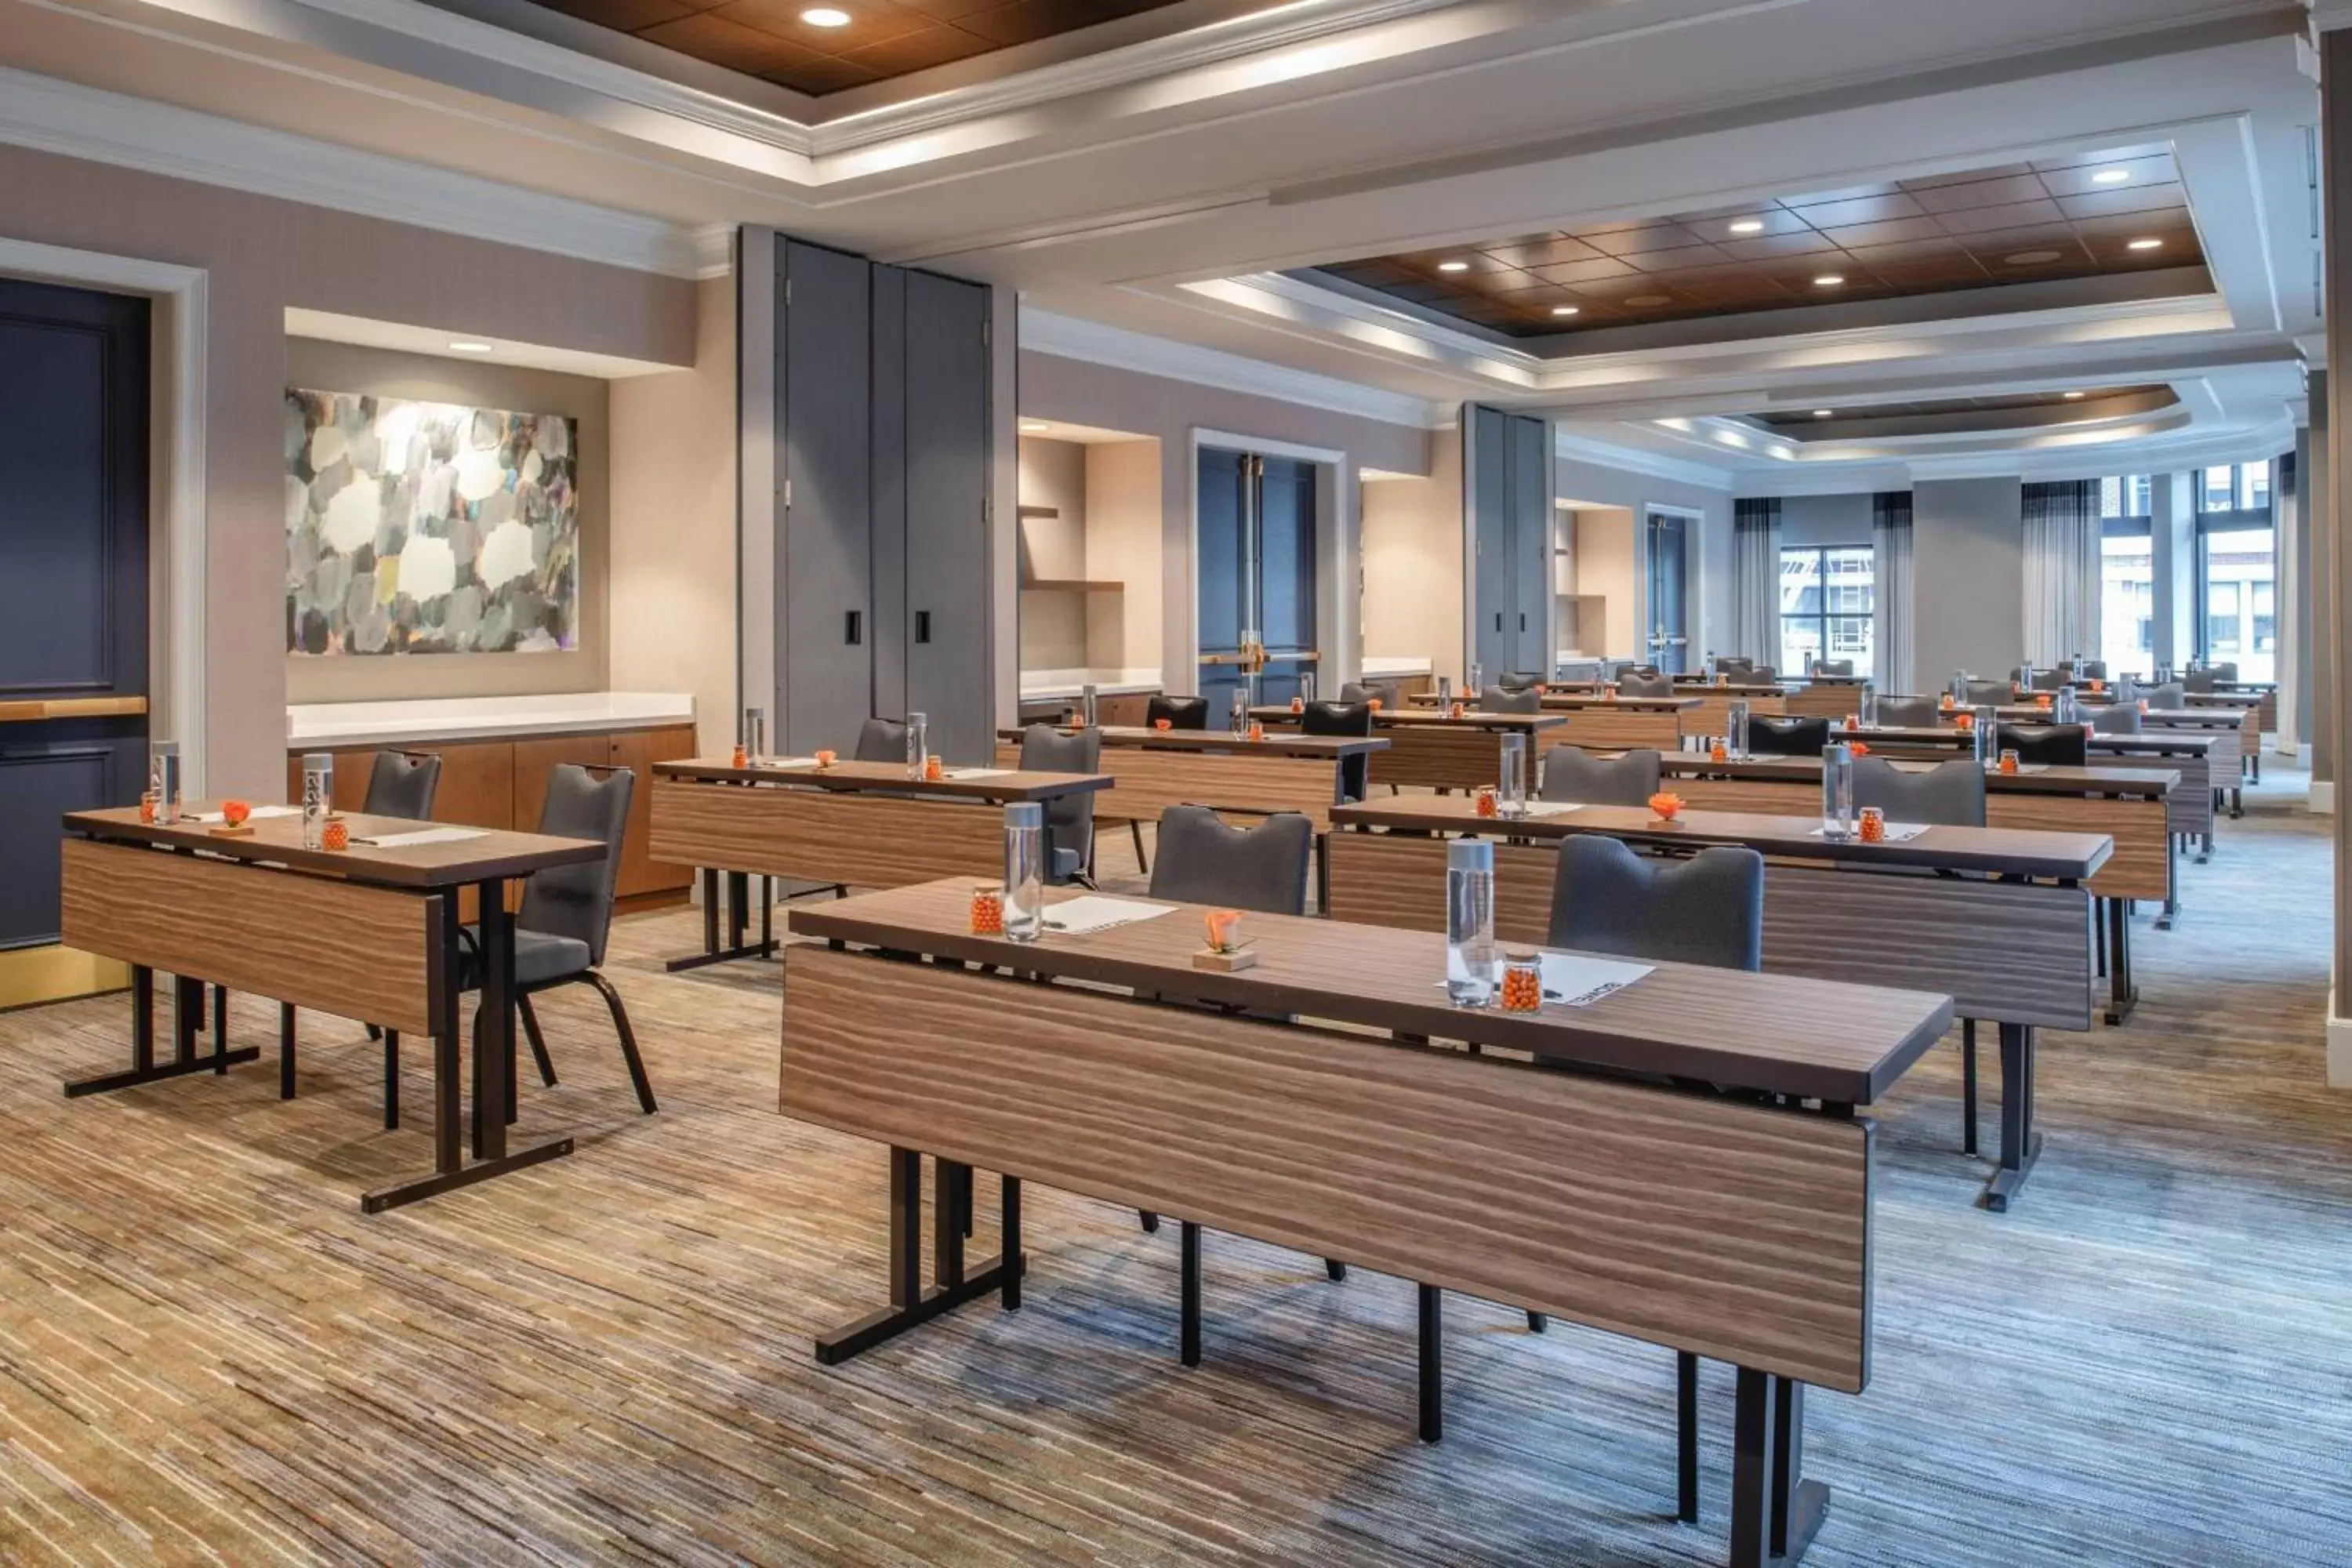 Meeting/conference room, Restaurant/Places to Eat in The Bidwell Marriott Portland